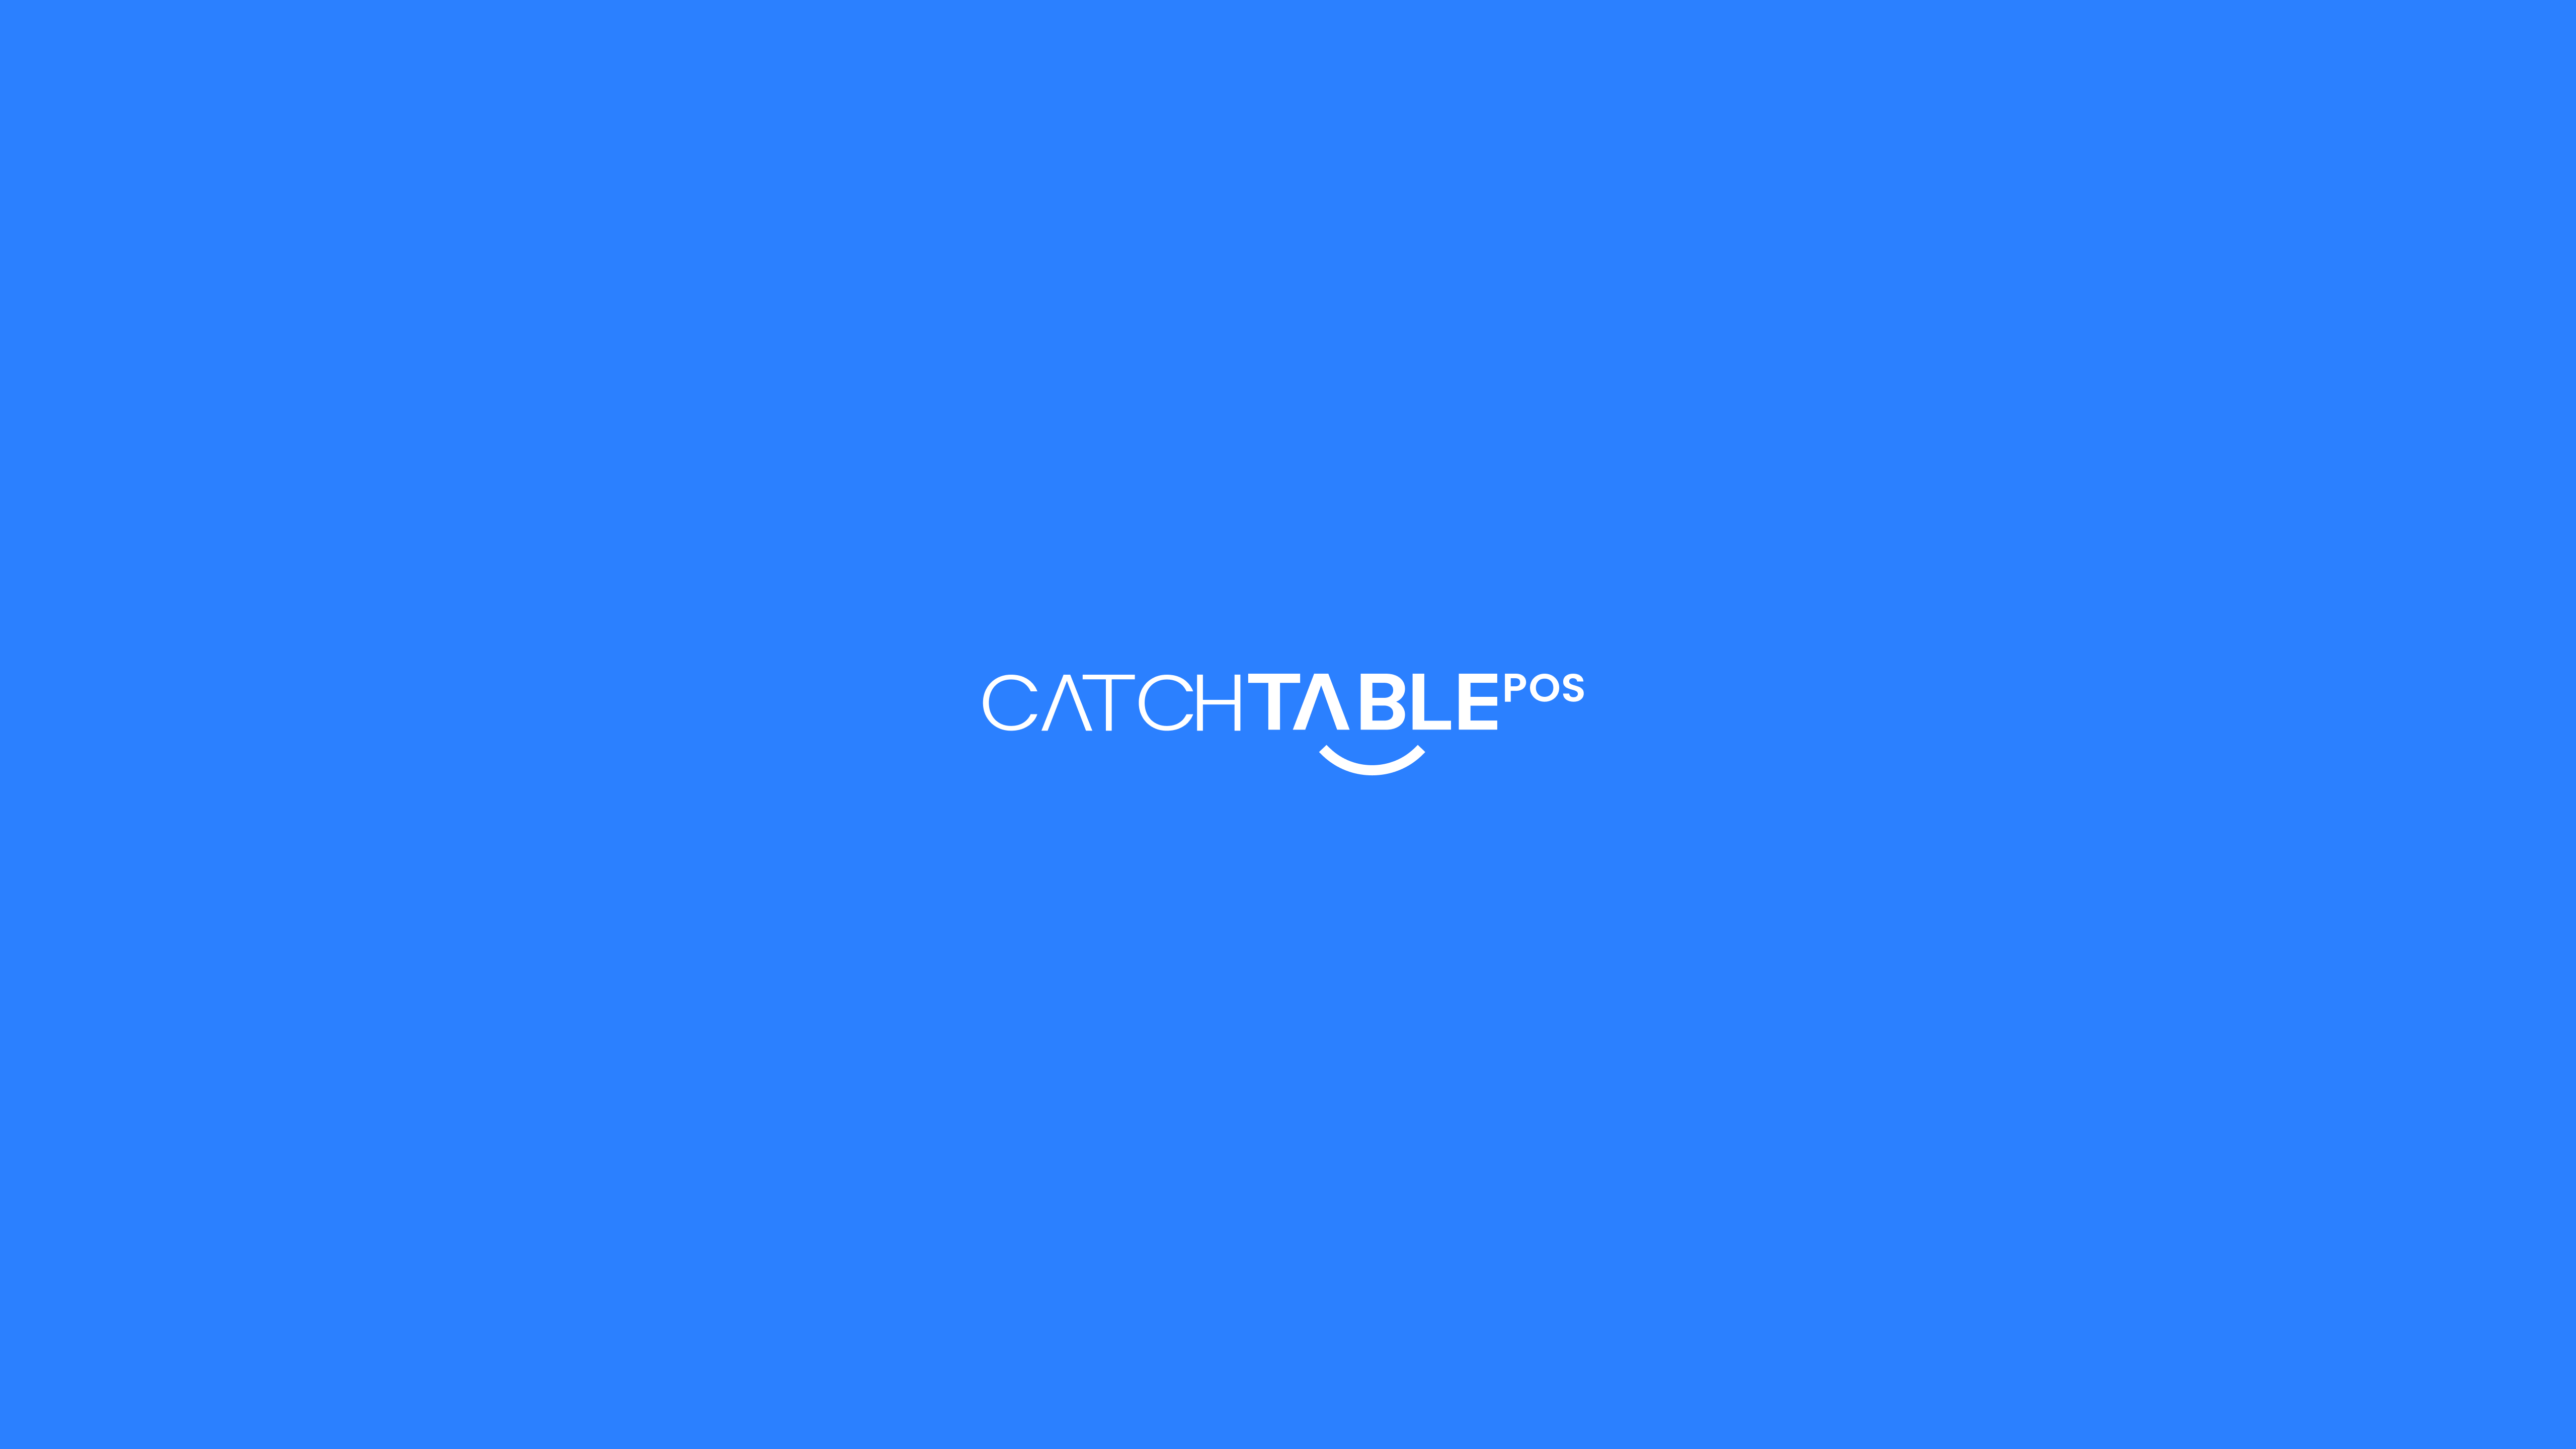 Catchtable POS